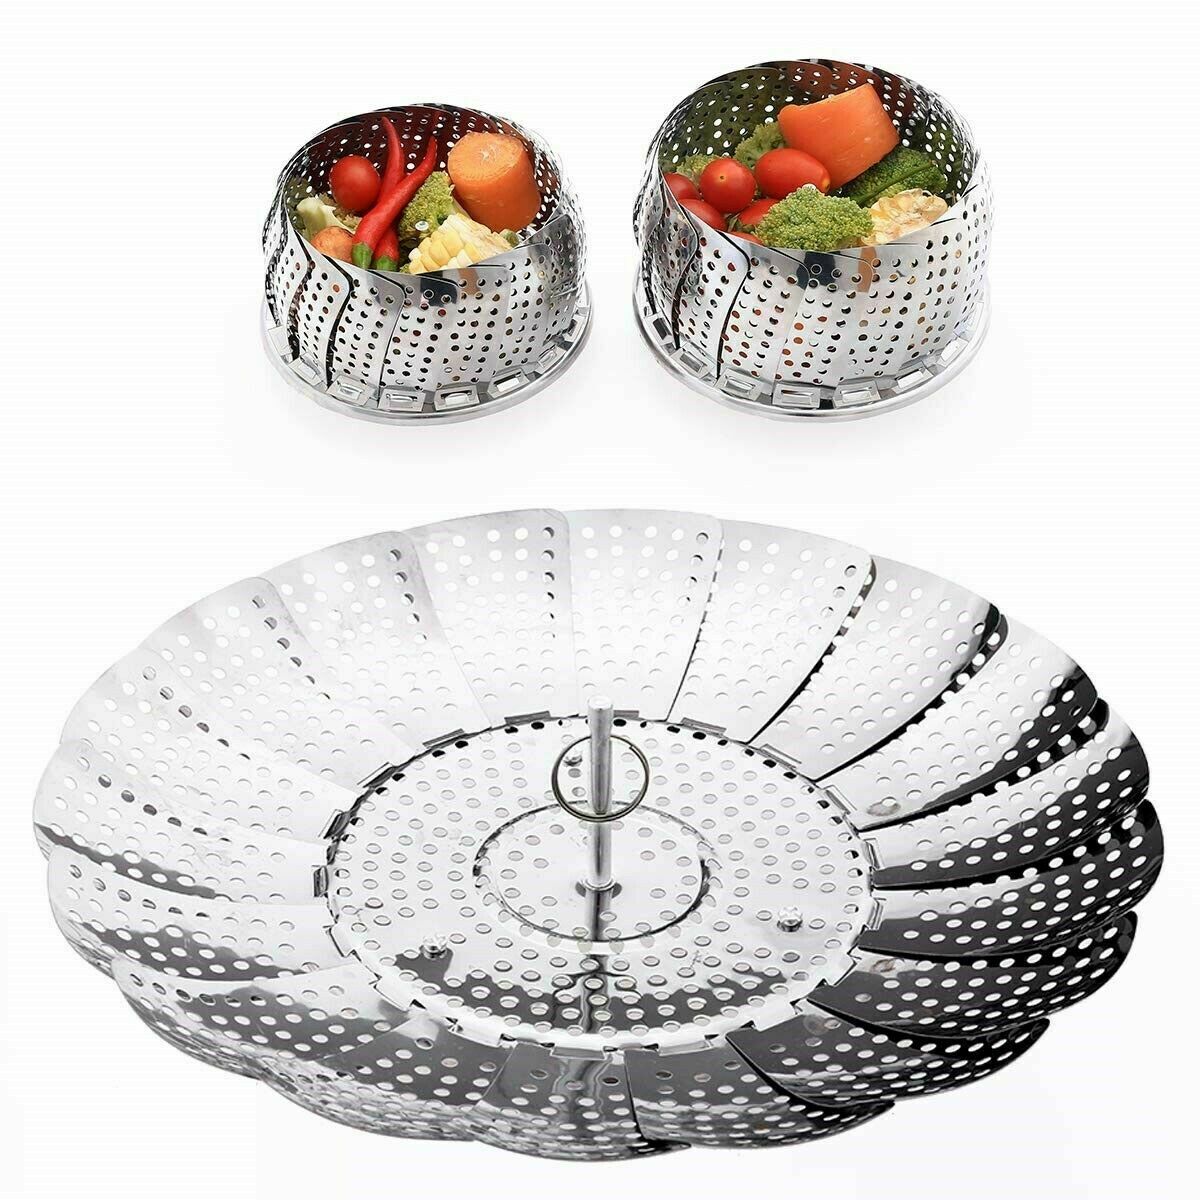 Stainless Steel Vegetable Steamer Basket Insert For Instant Pots And Other Pots